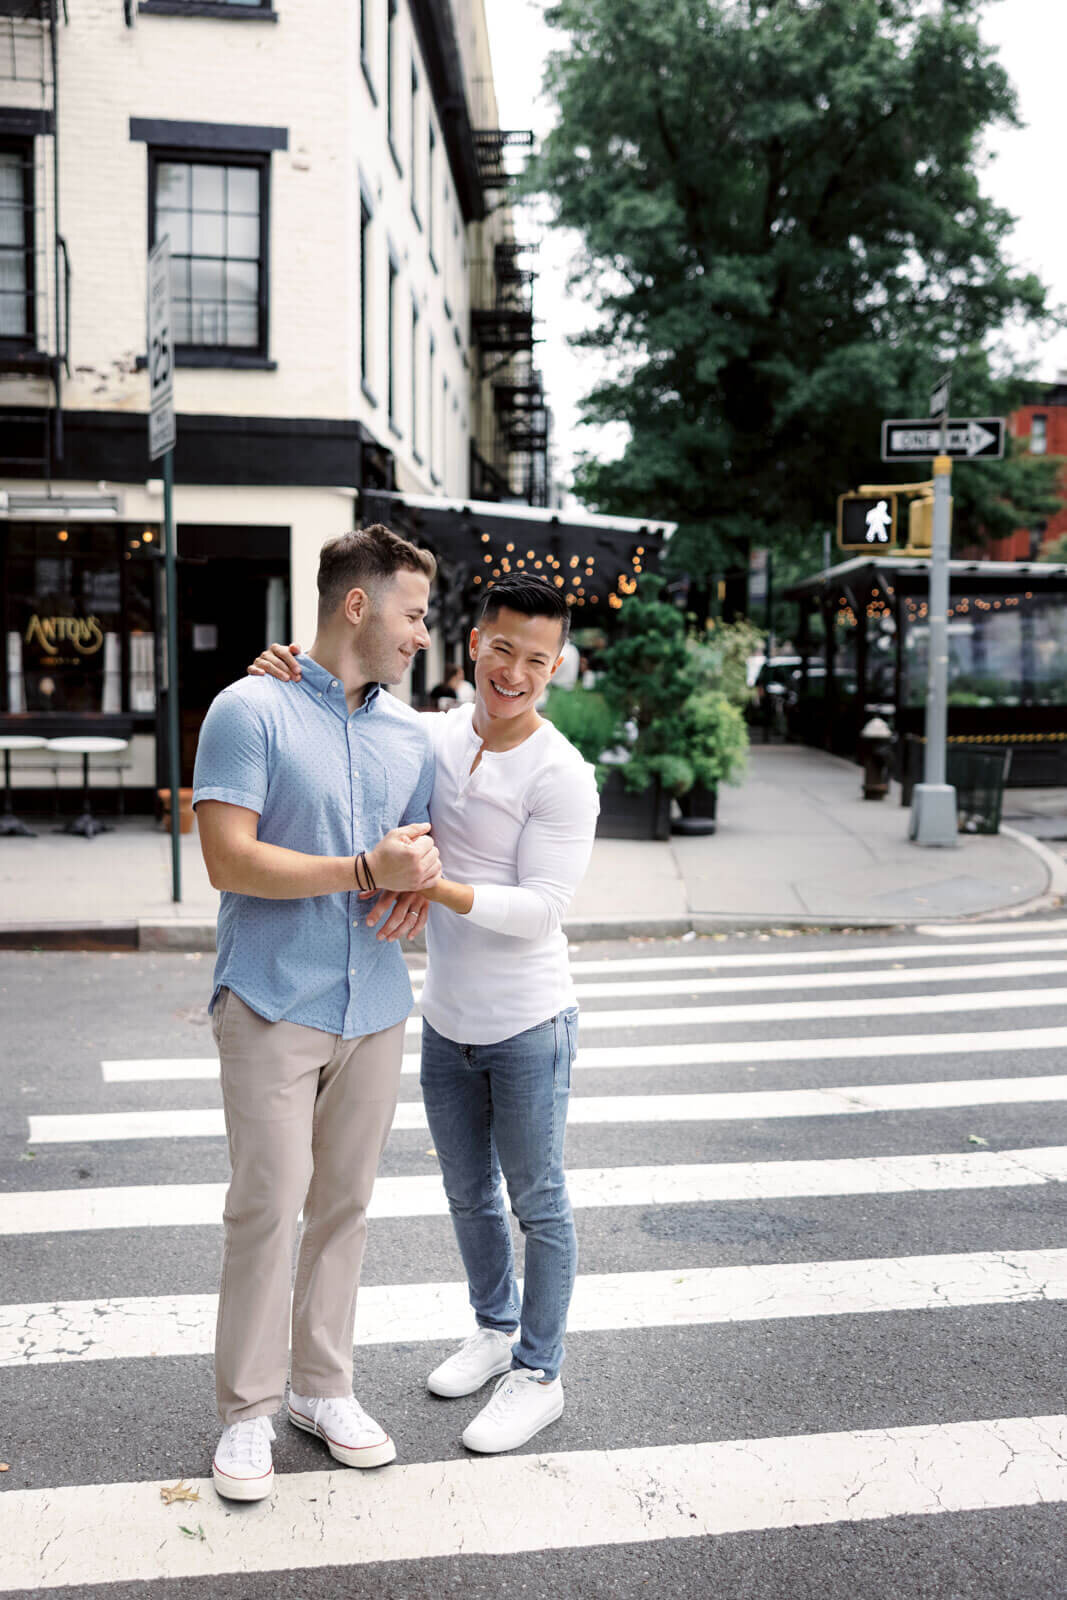 The engaged man is happily looking at his fiancé's face in the middle of a street in West Village, NYC. Image by Jenny Fu Studio